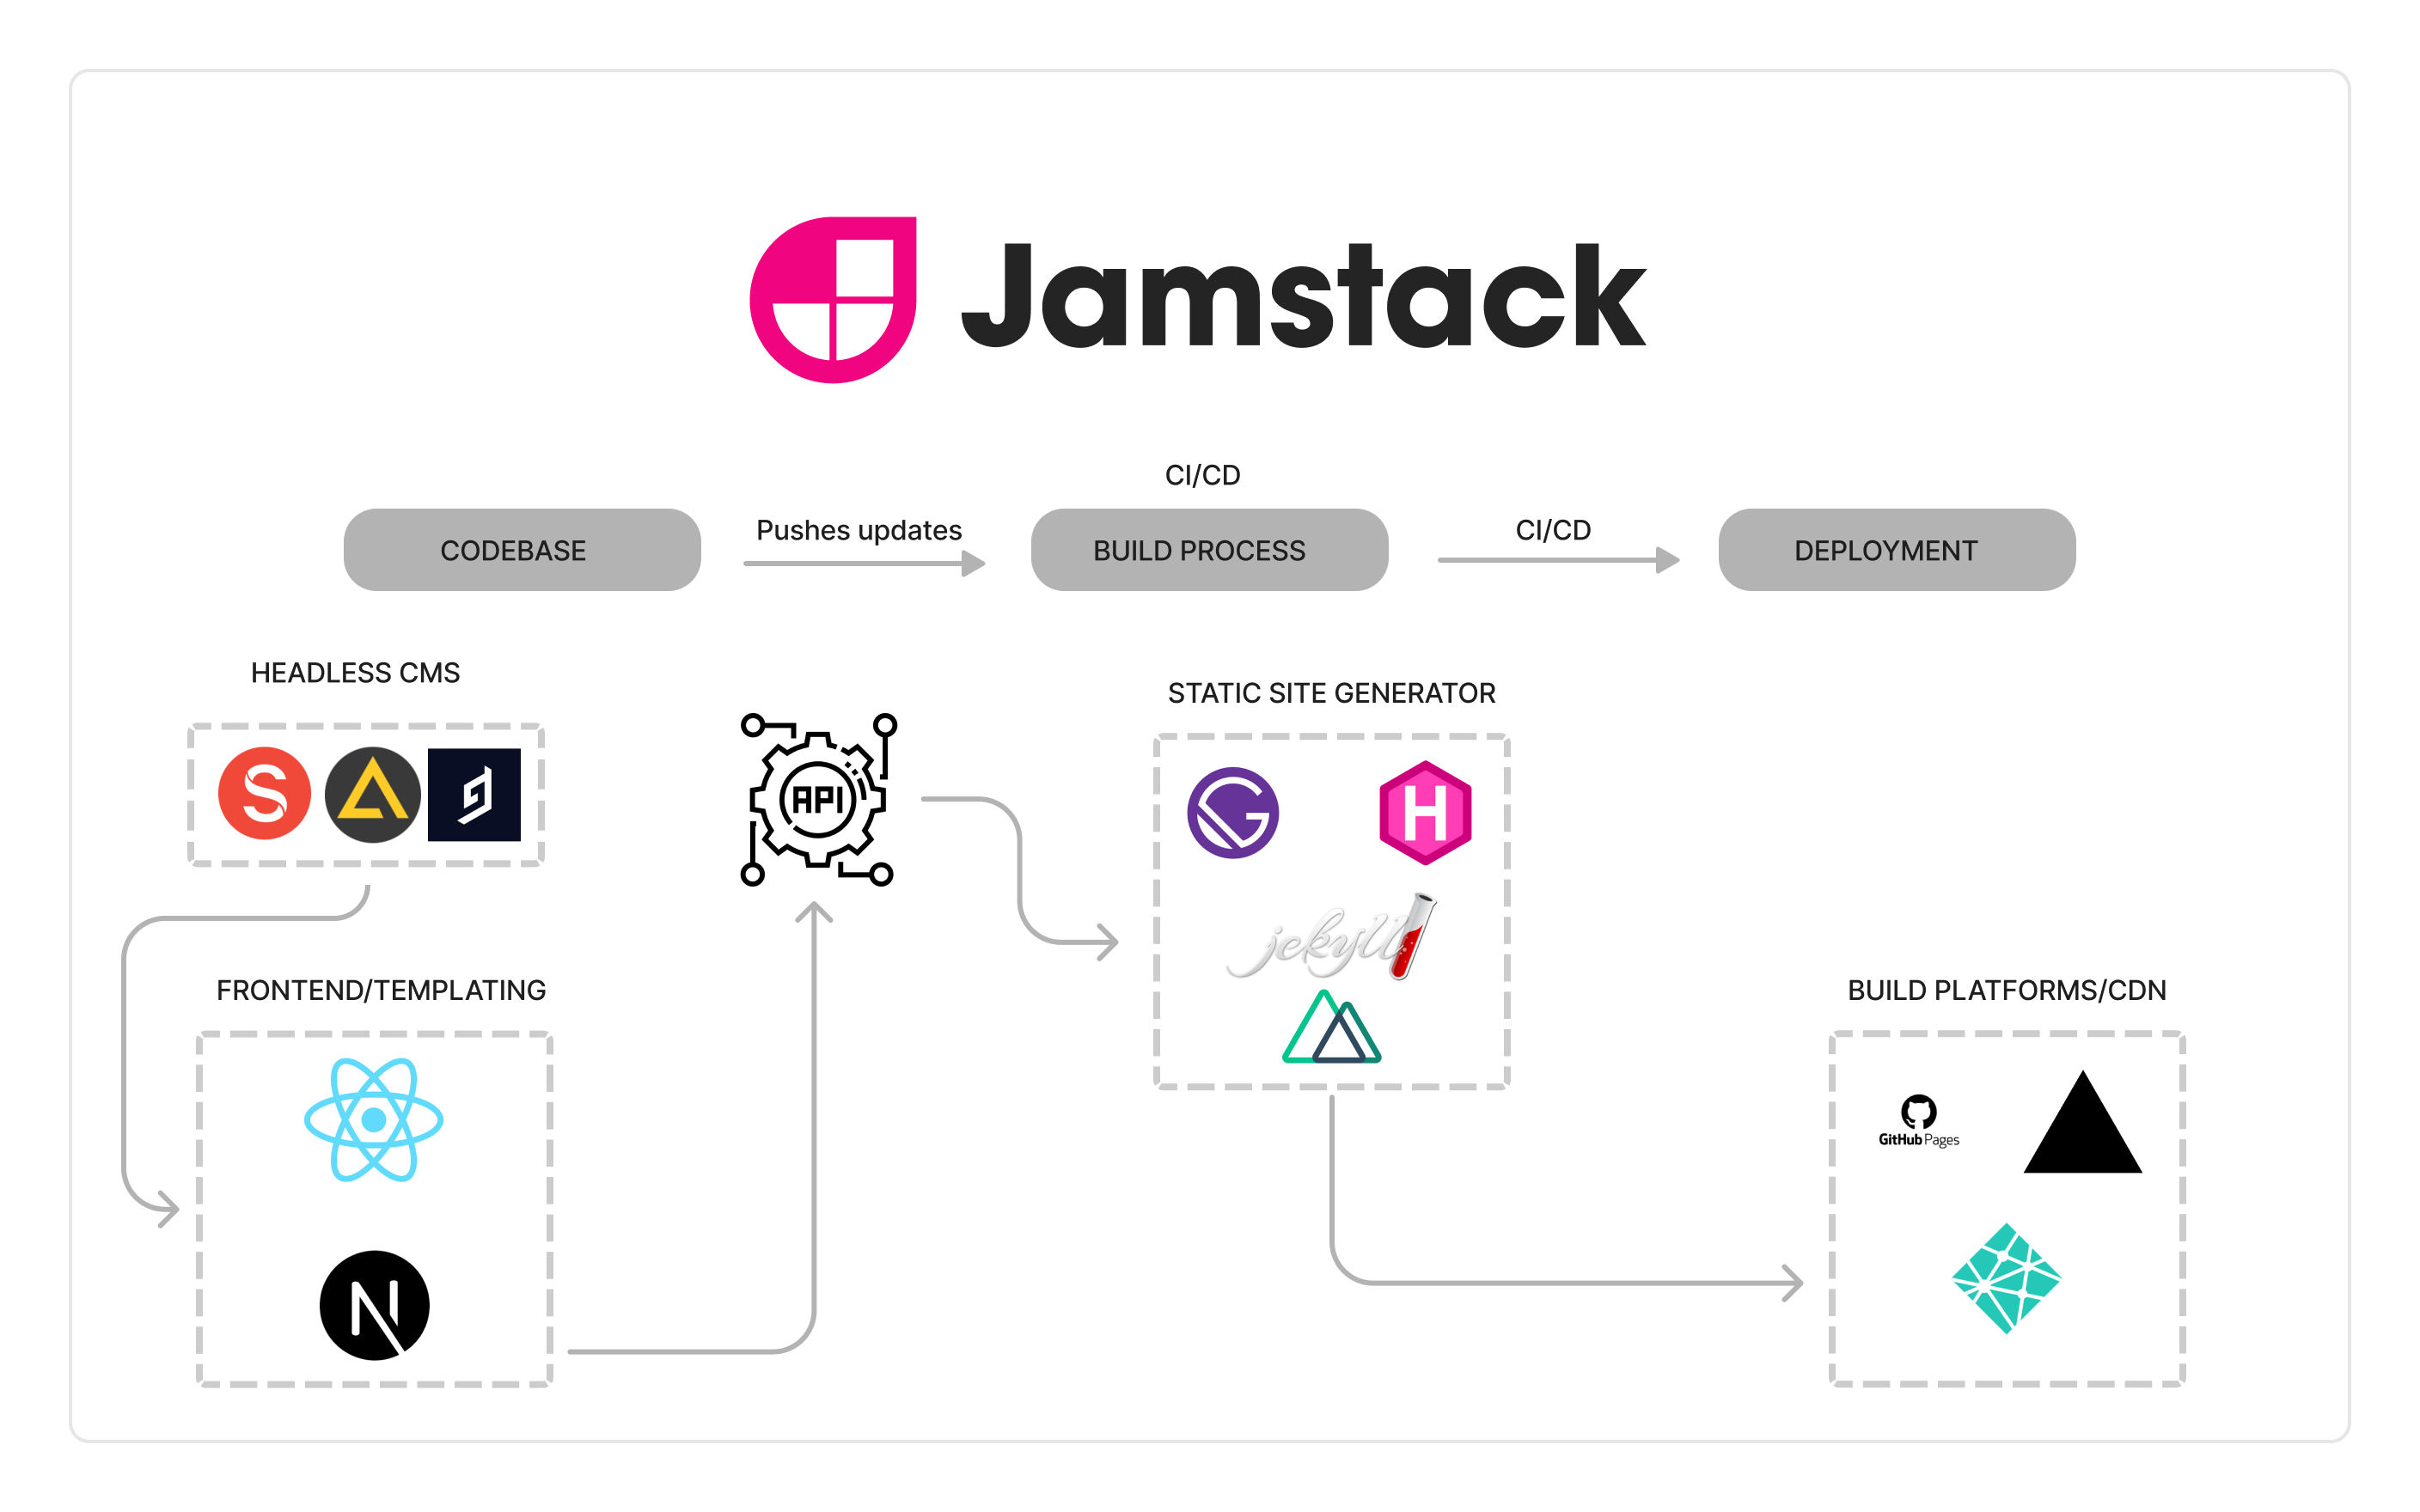 a diagram showing the Jamstack app workflow